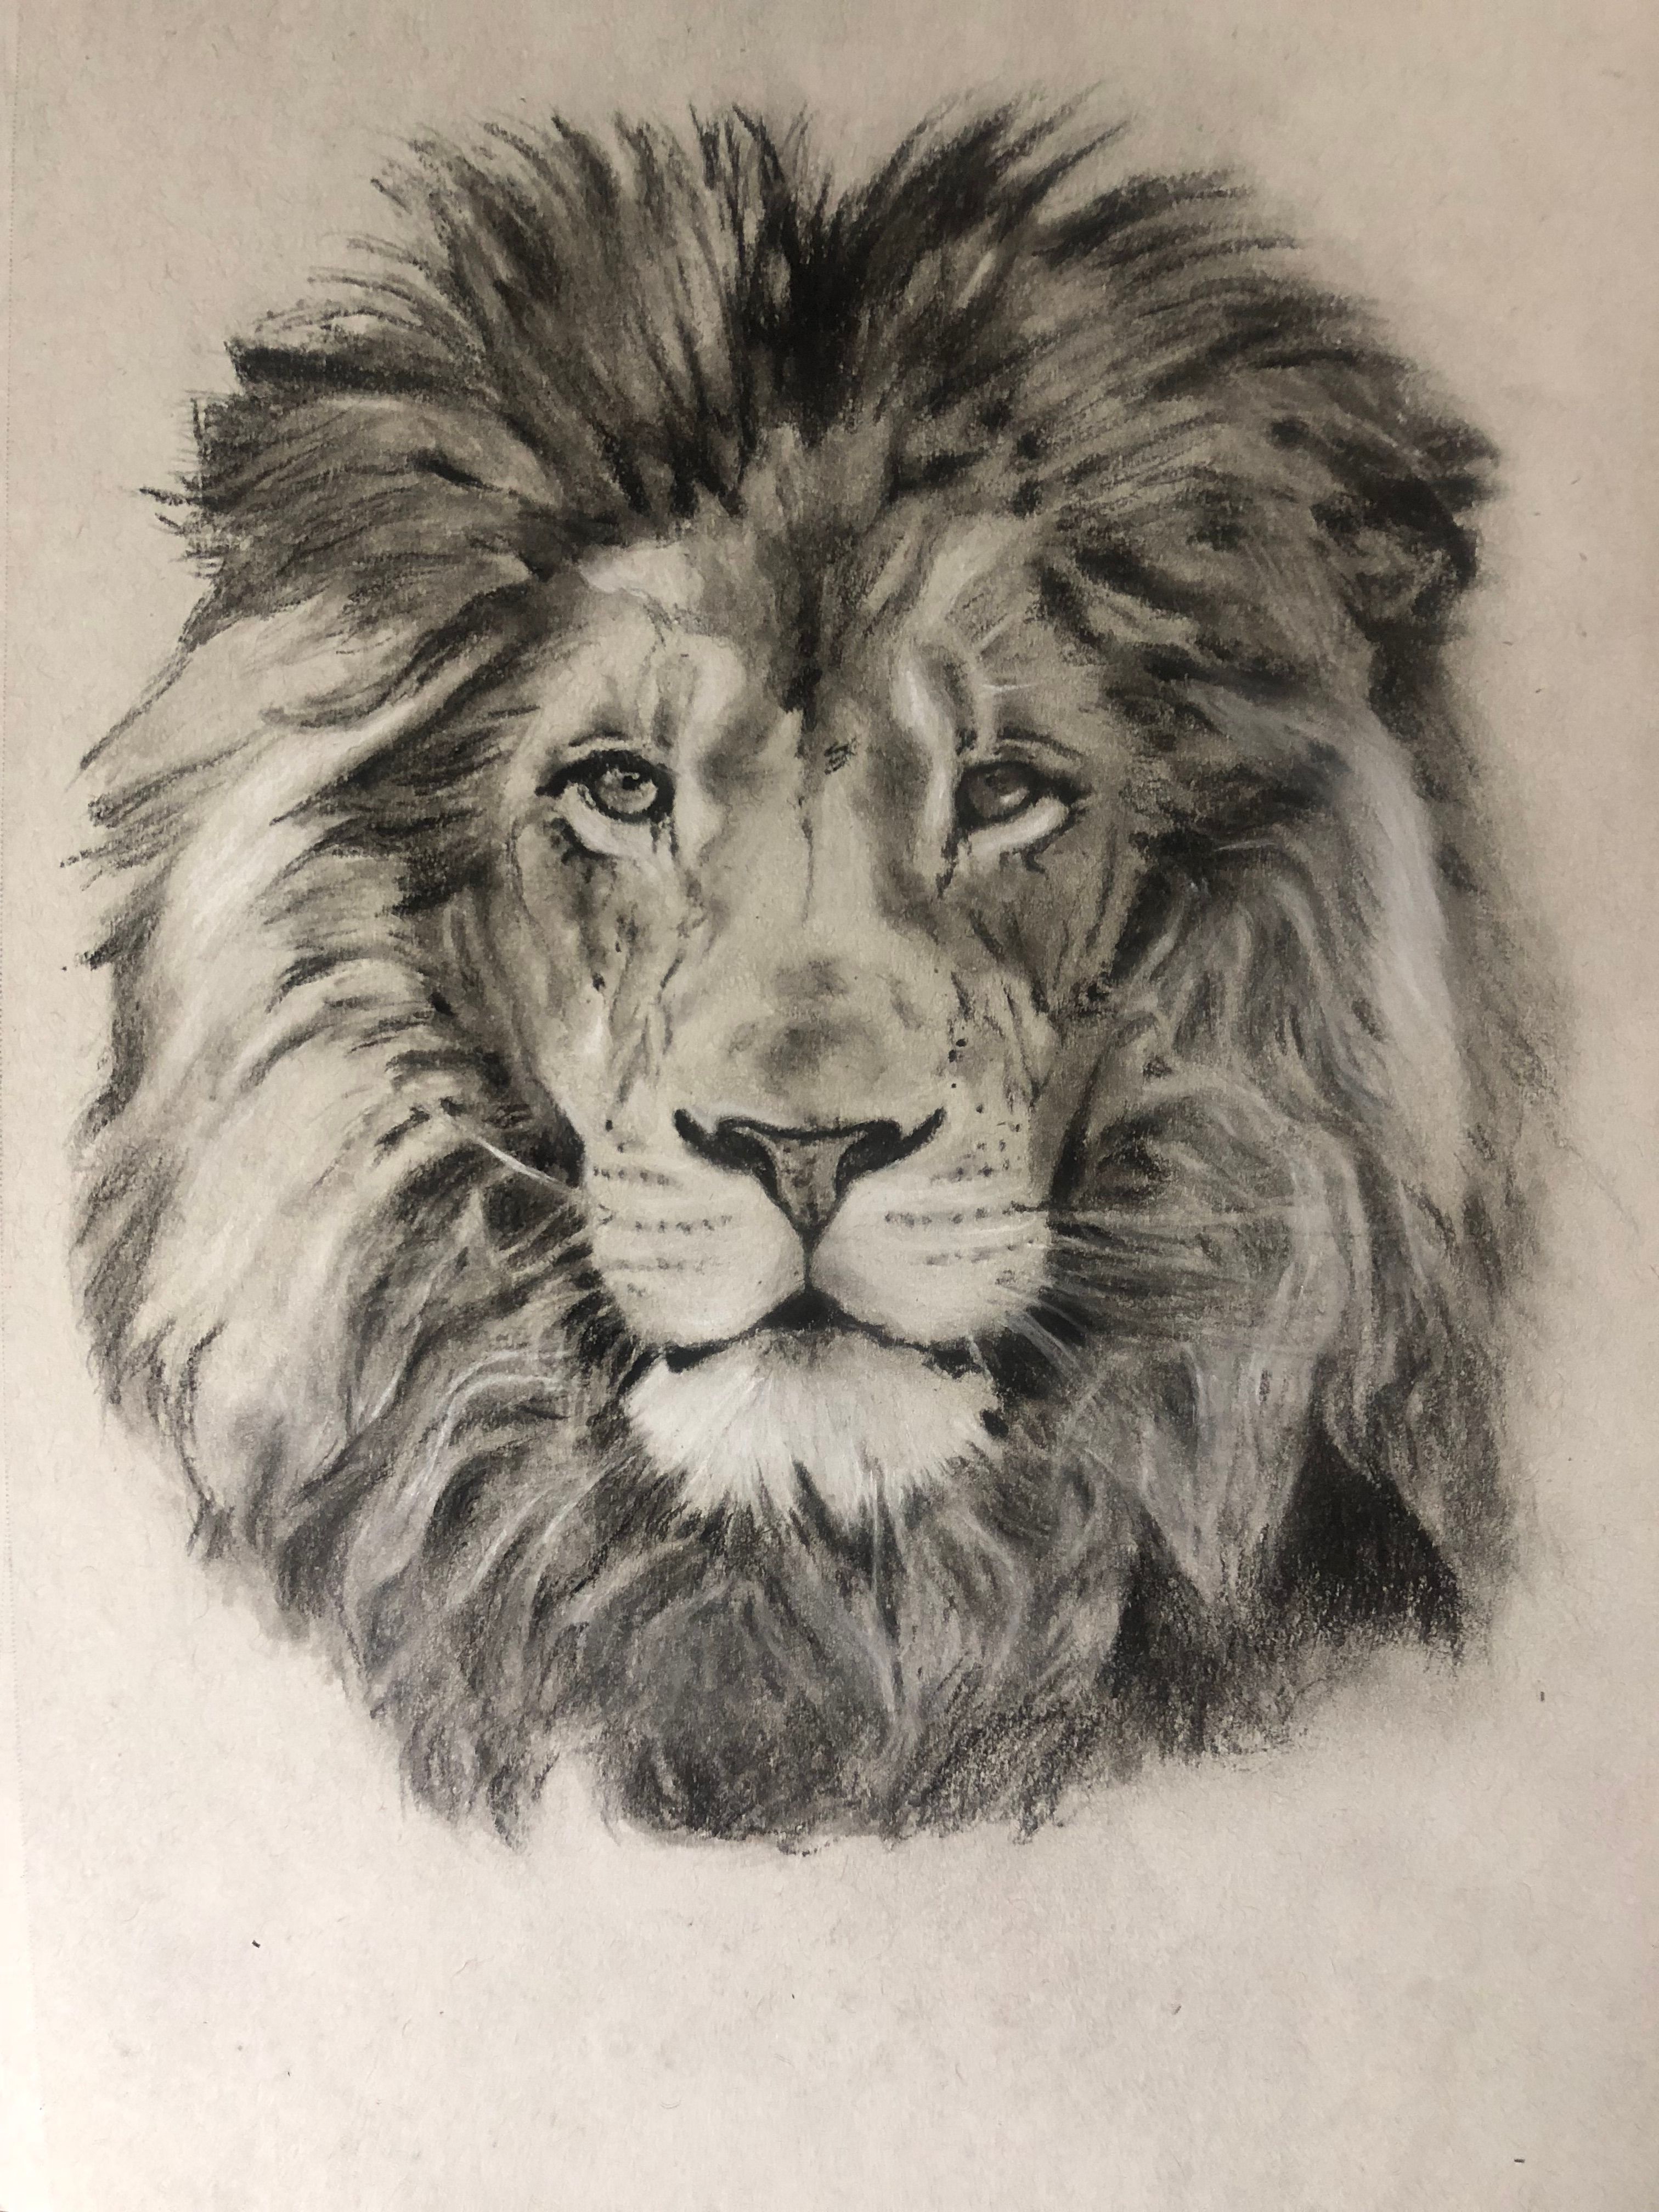 I've made this pencil drawing of a lion as a... - KATARZYNA KMIECIK